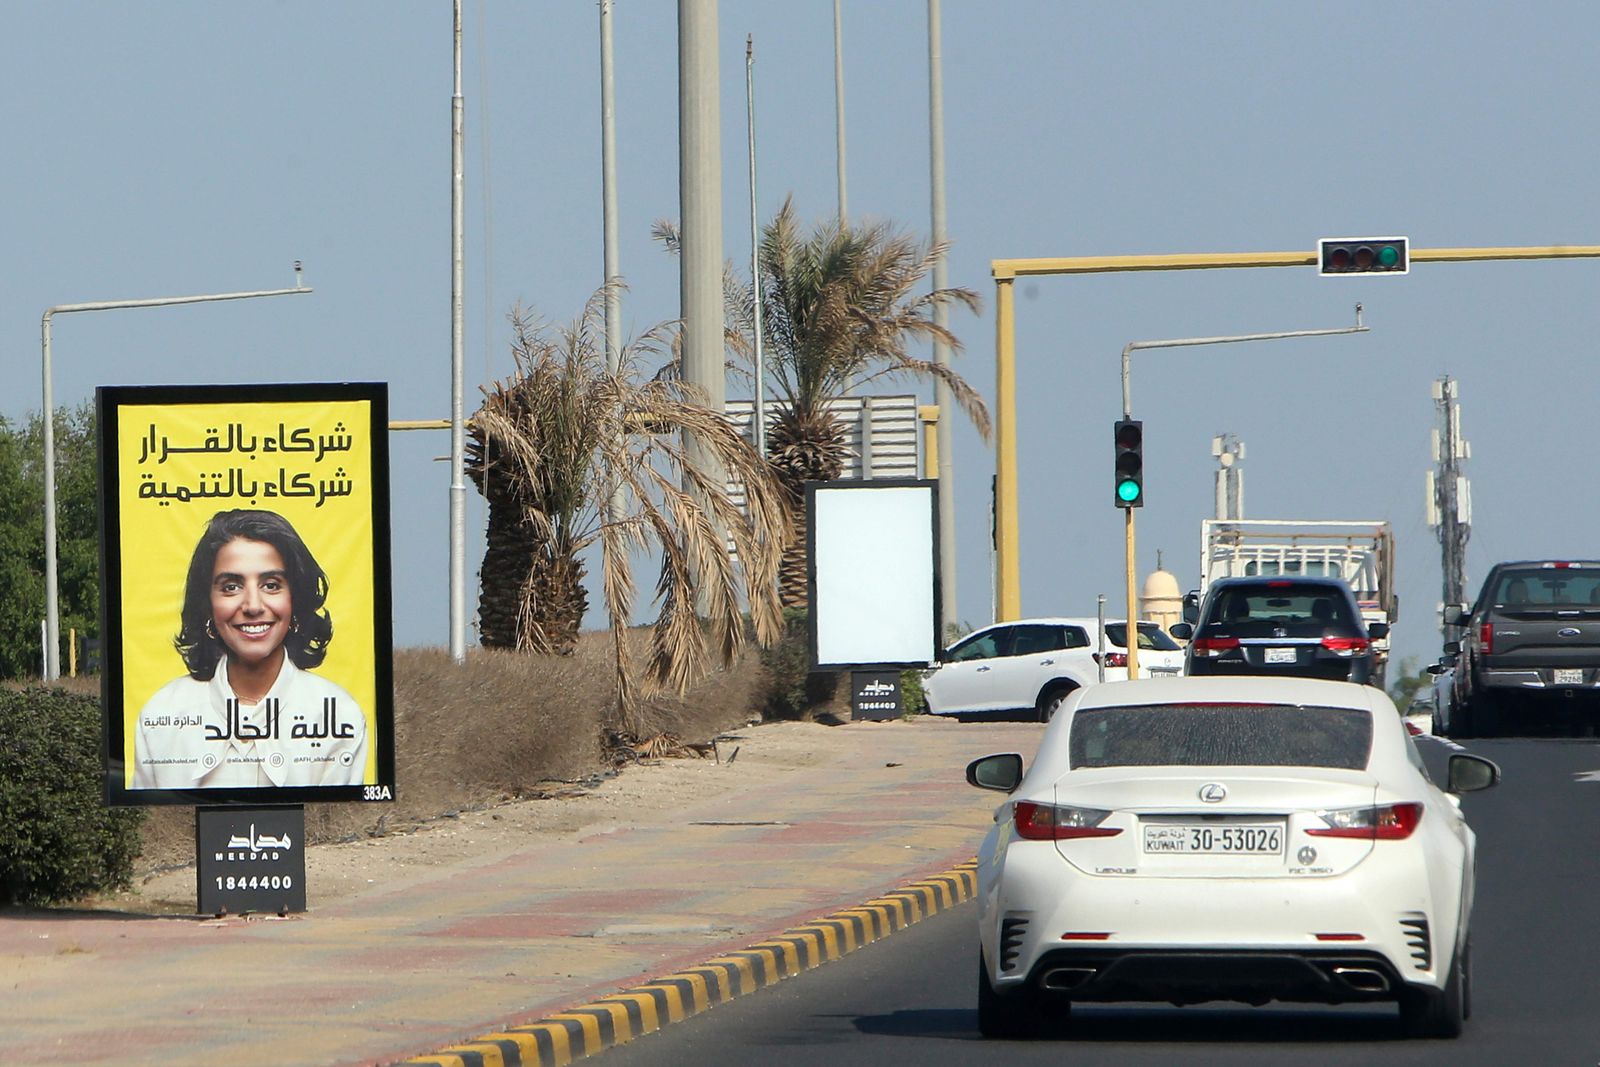 A billboard featuring a candidate running for Kuwait's parliamentary elections is seen in Kuwait city, on November 22, 2020. (Photo by YASSER AL-ZAYYAT / AFP) - AFP